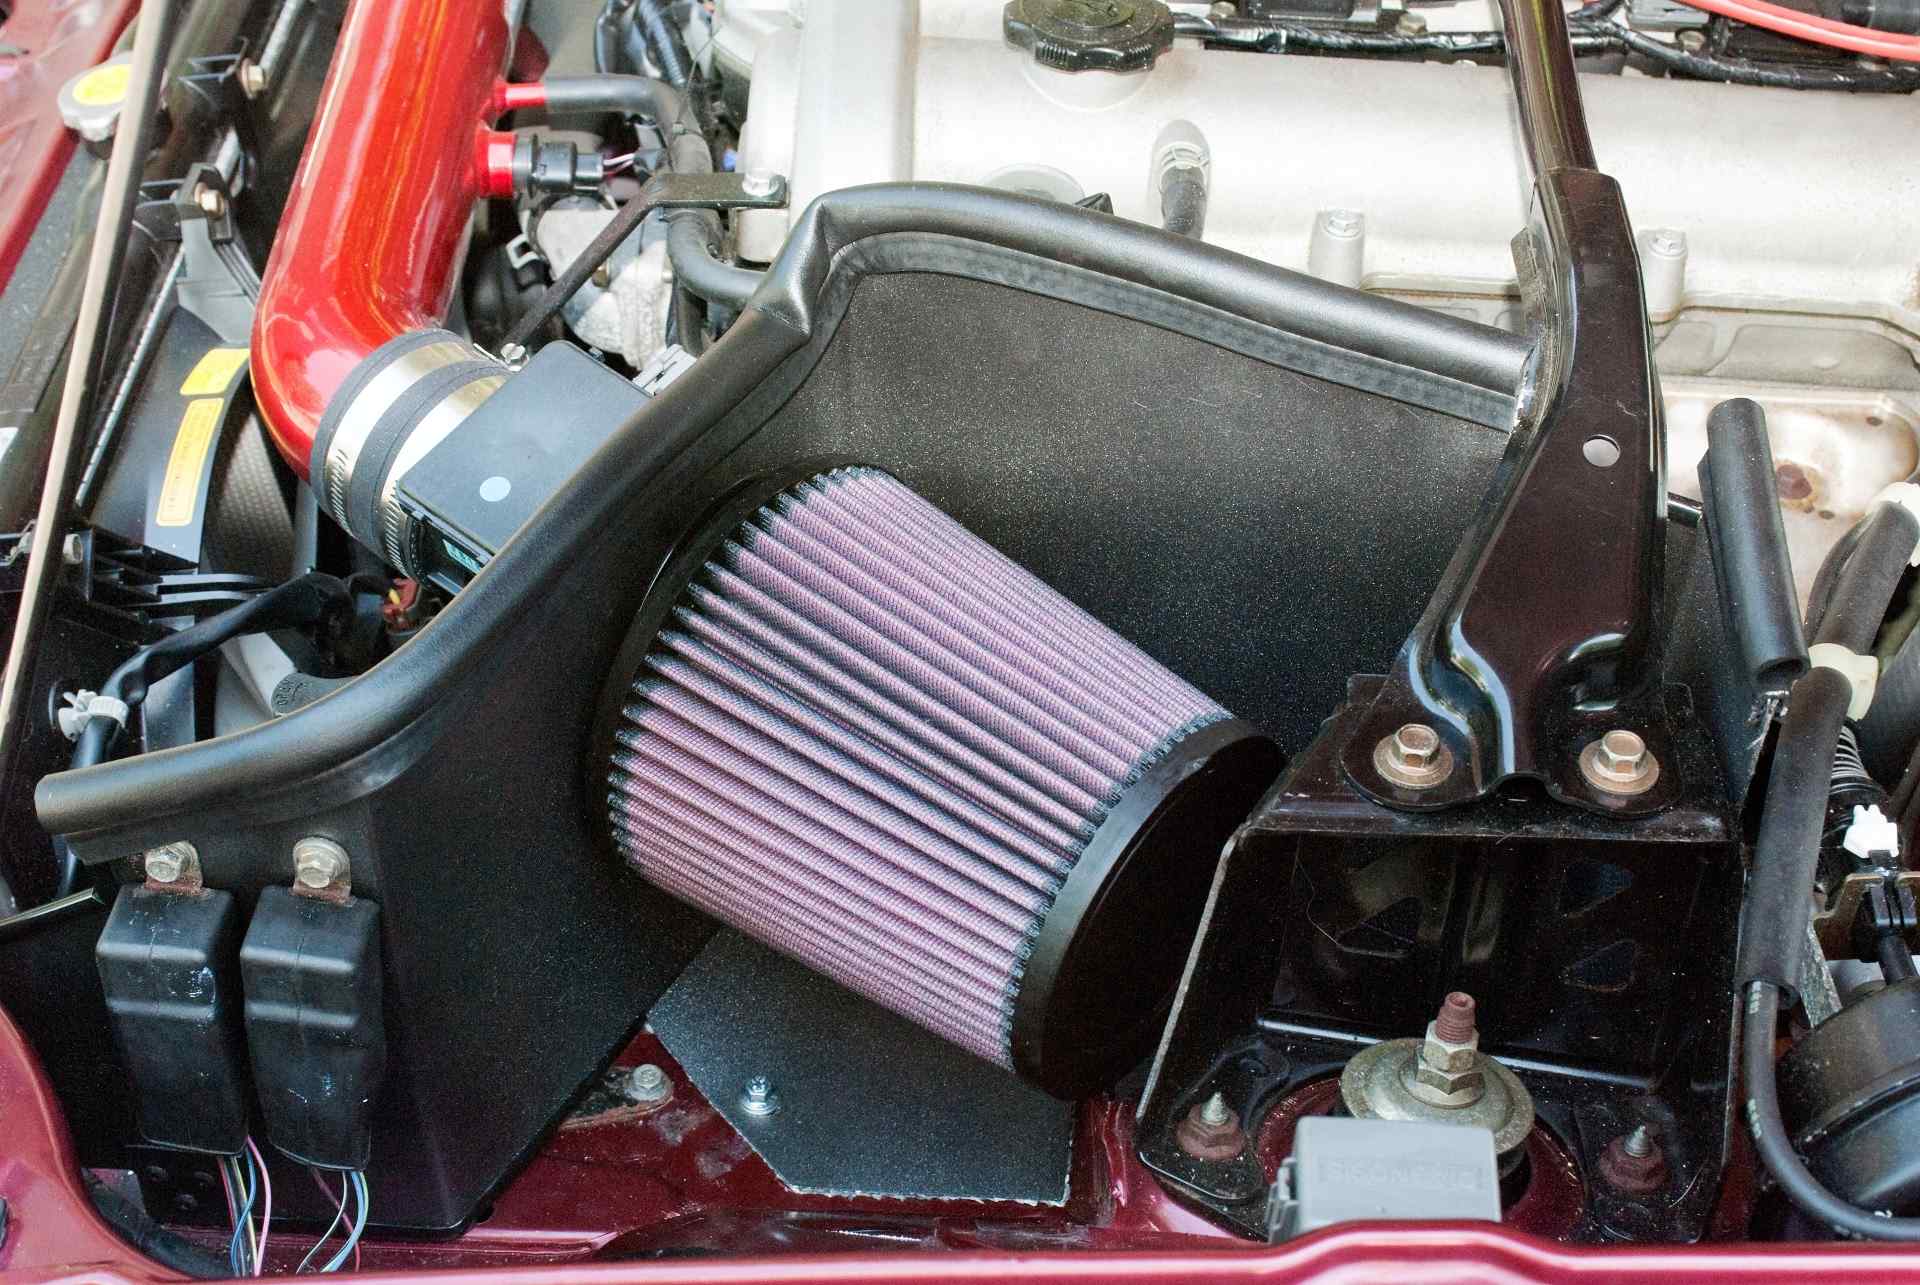 An image of a cold-air intake installed, prominently featuring an insulated air filter